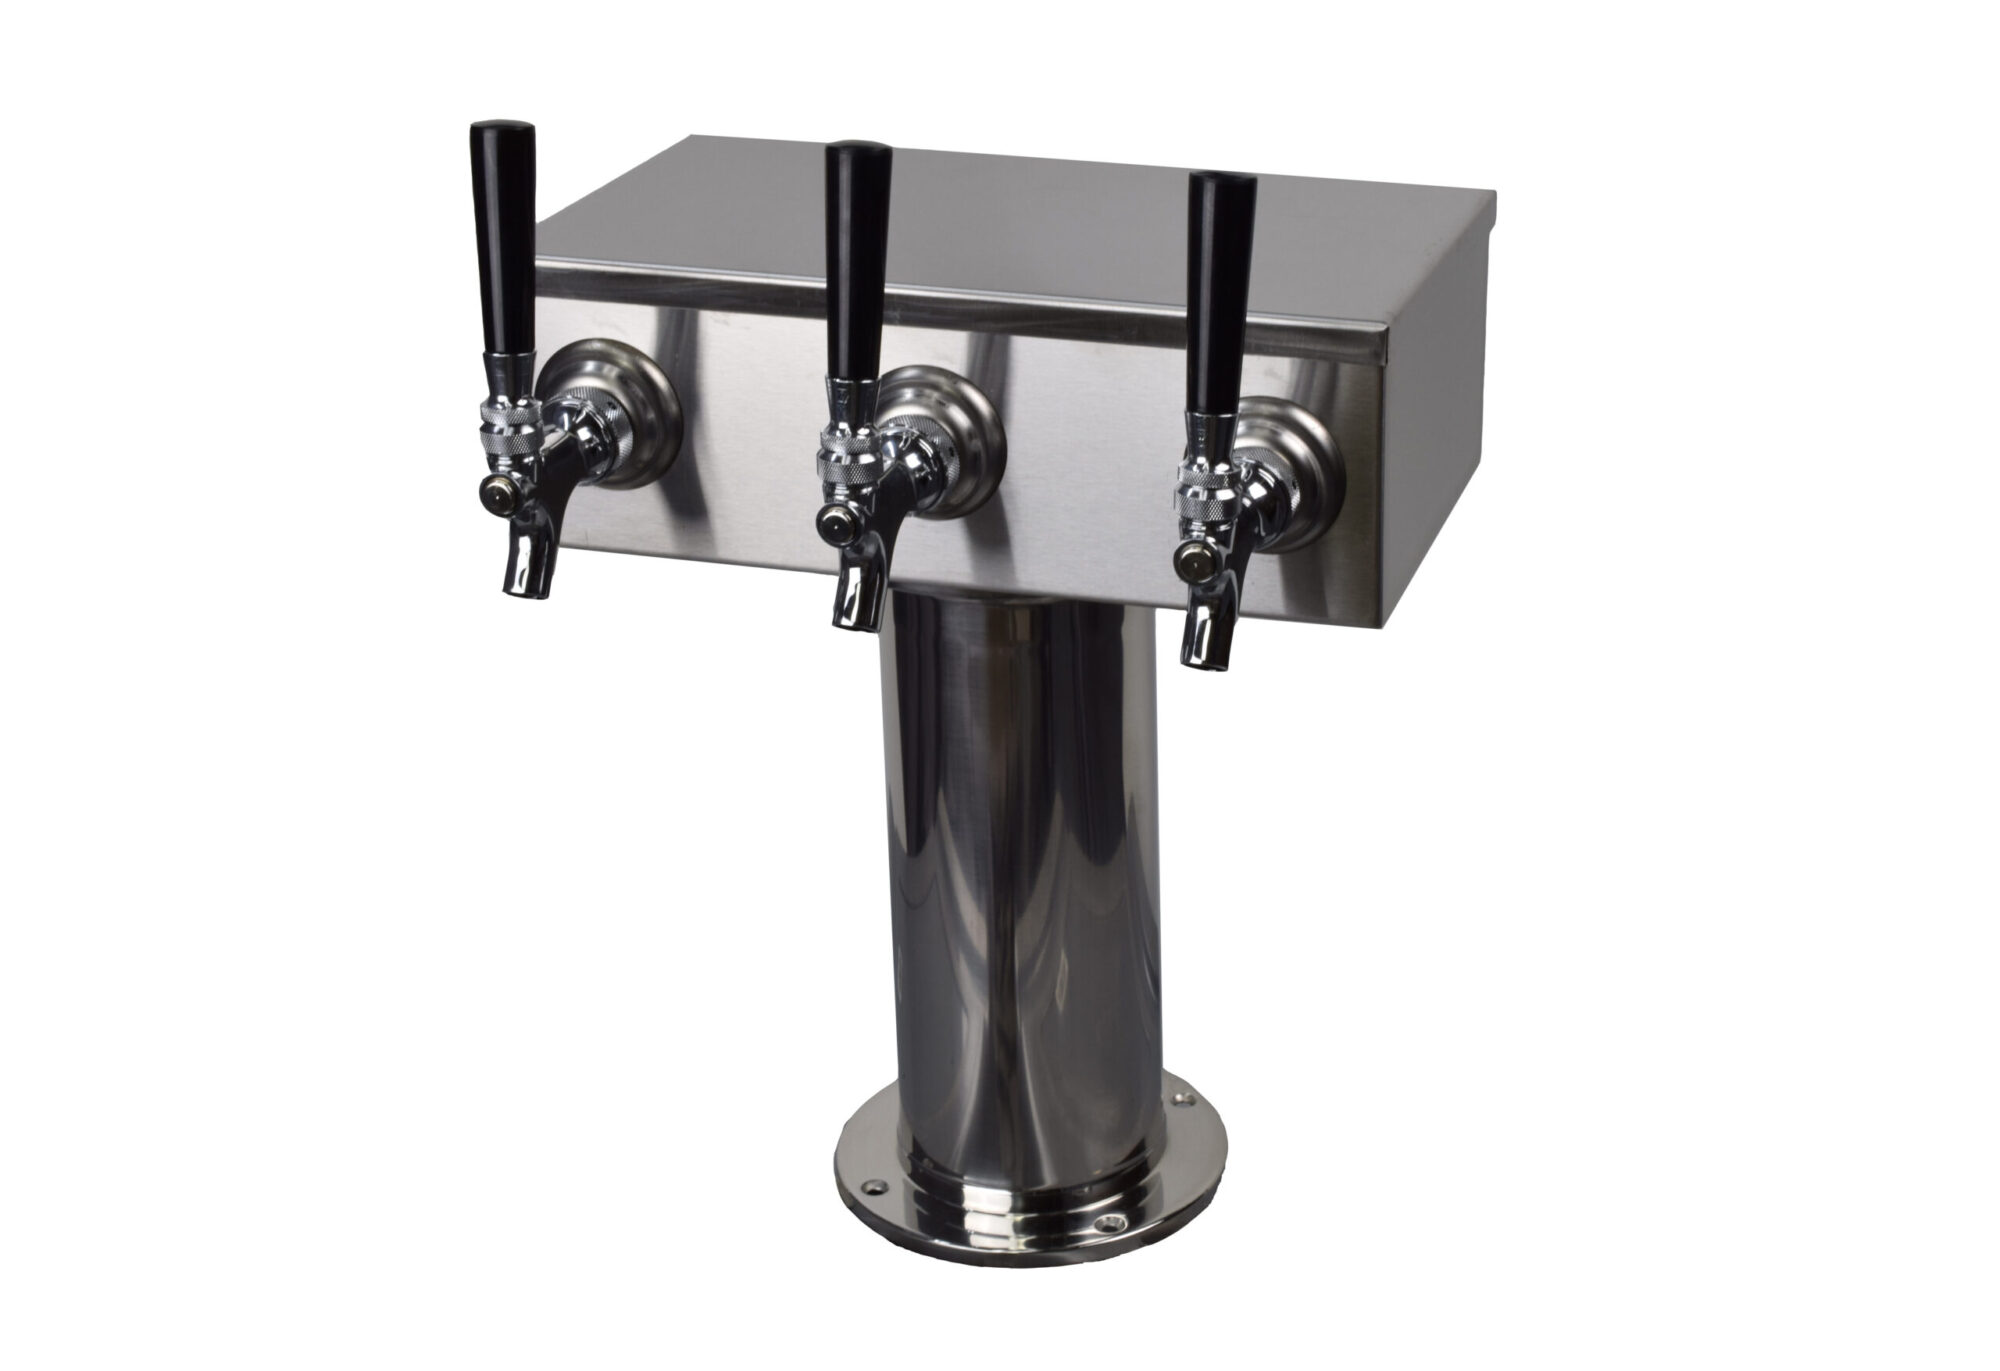 733NR-4SSW Three Facet Wine Tower - All 304 S/S with Barrier Tubing - Non NSF